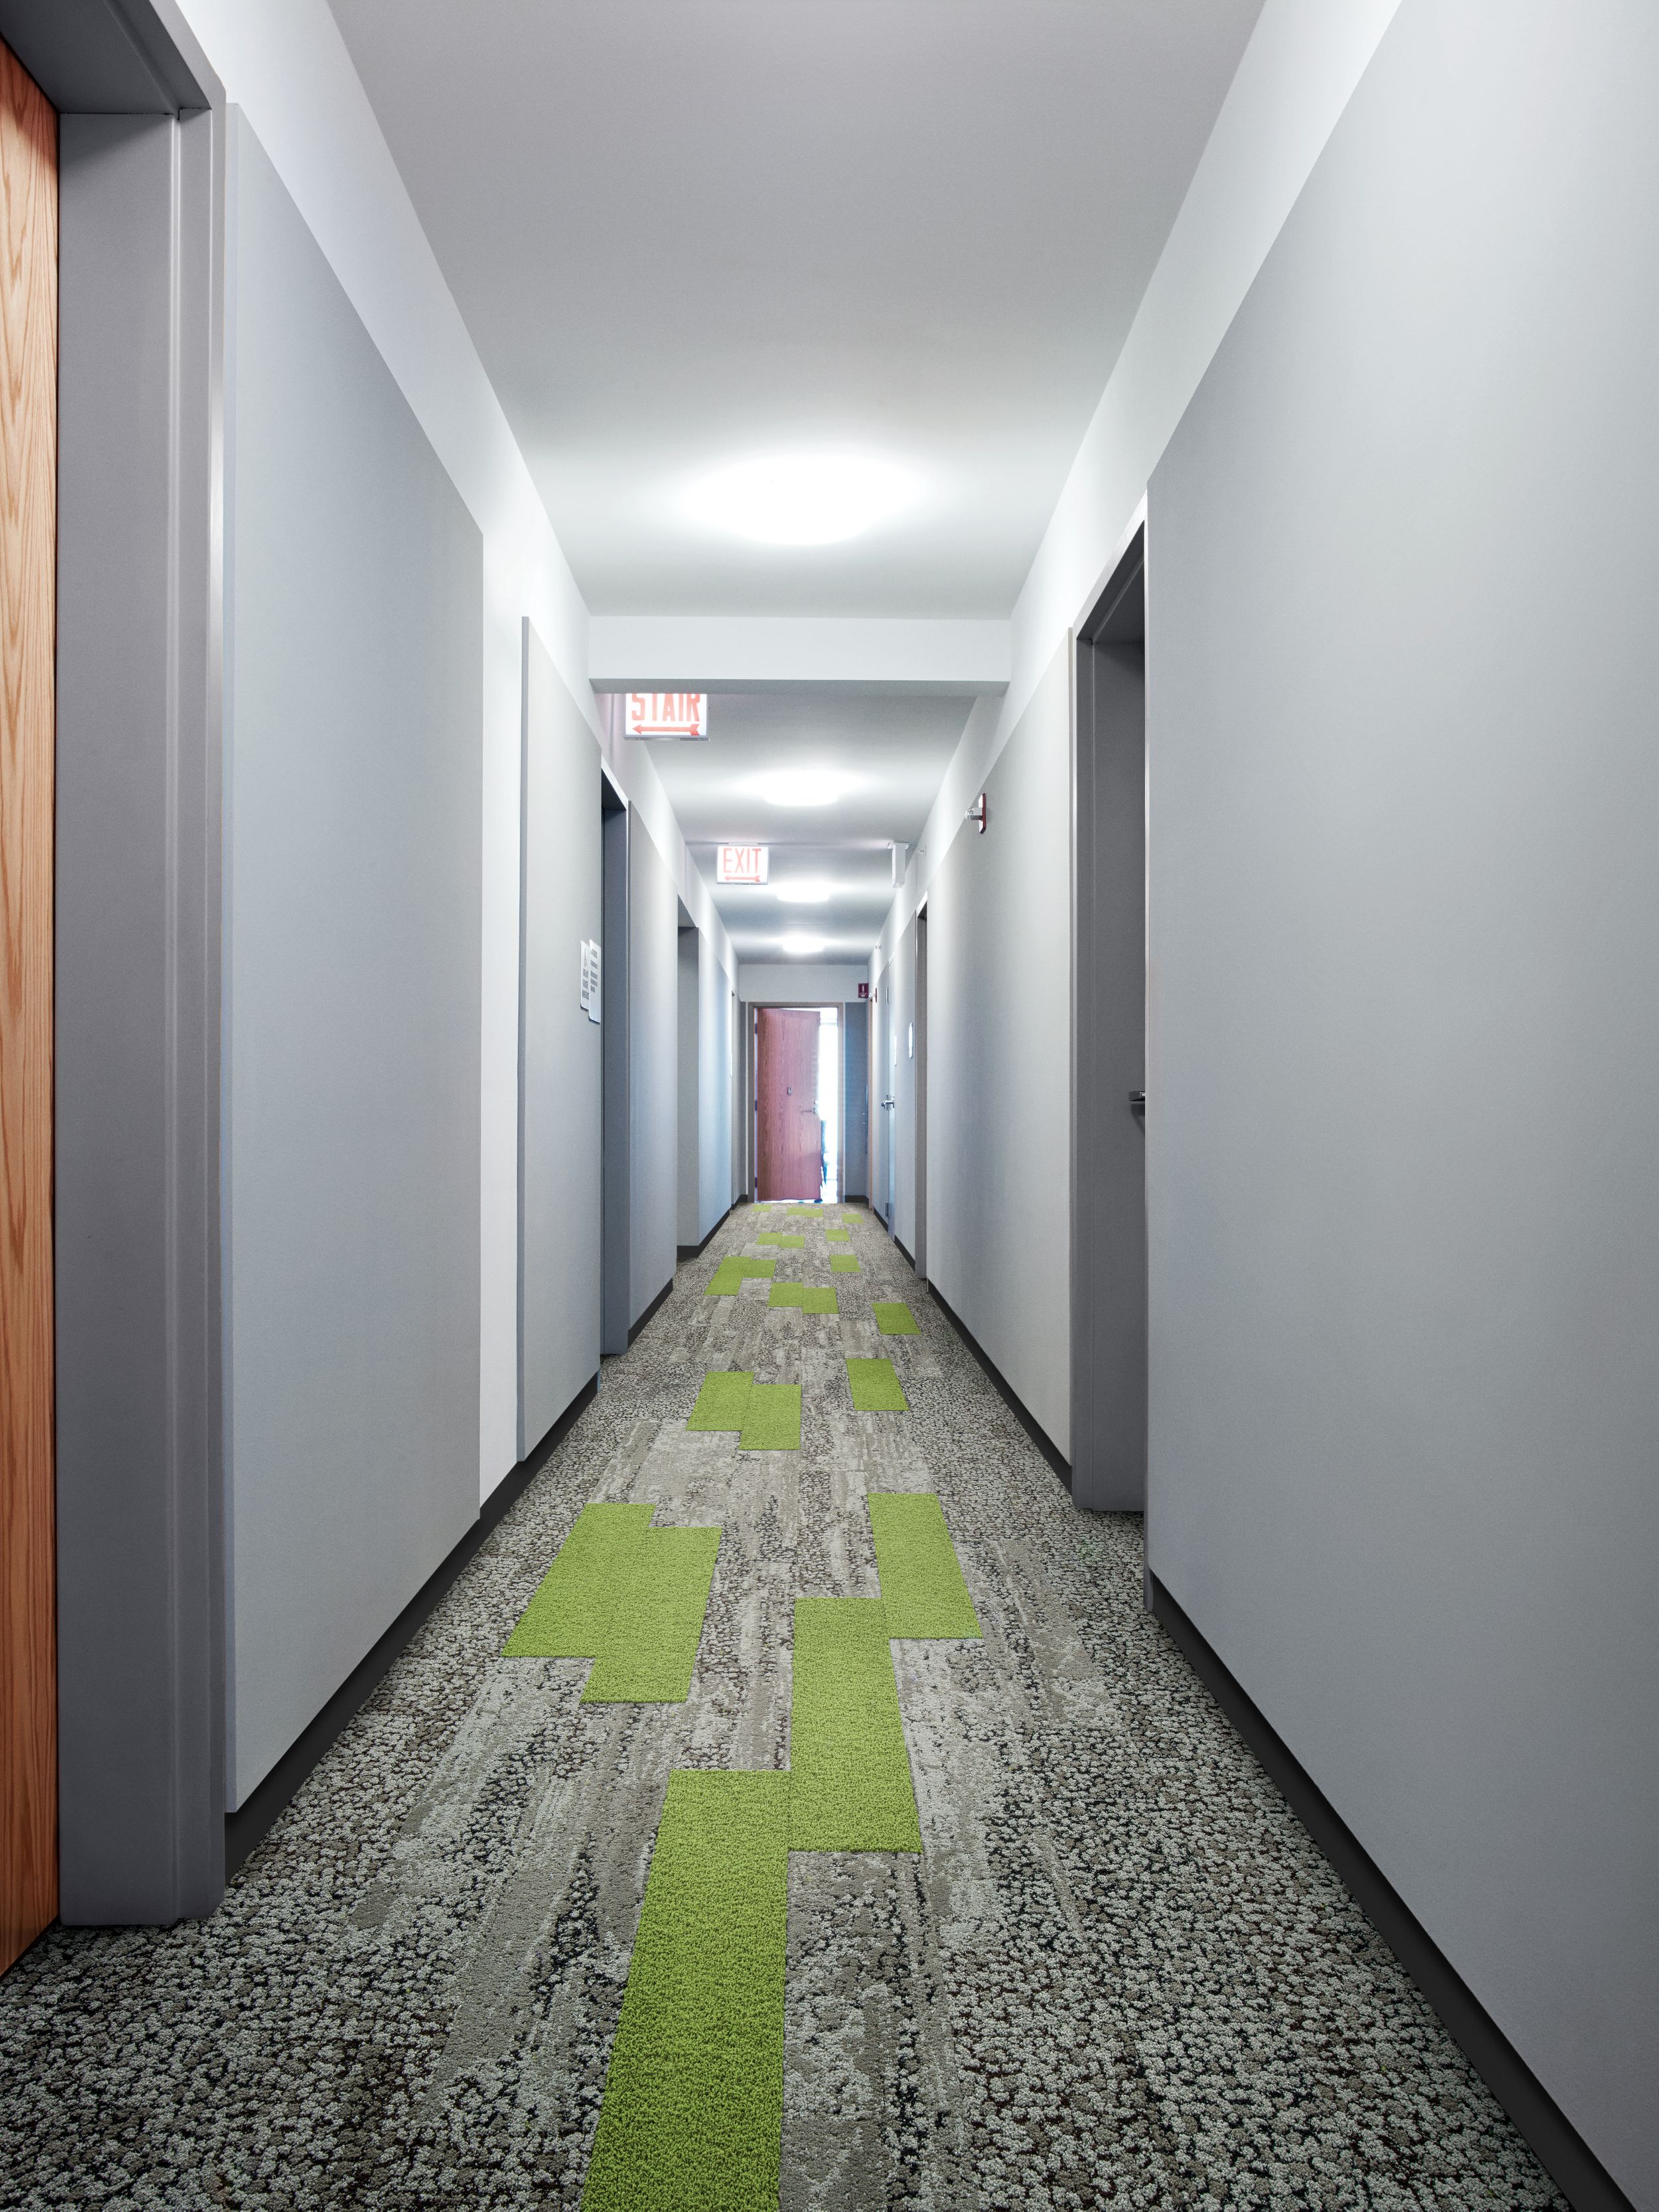 Interface HN830 and HN850 plank carpet tiles in long corridor with mutliple doors and wood door at end numéro d’image 7